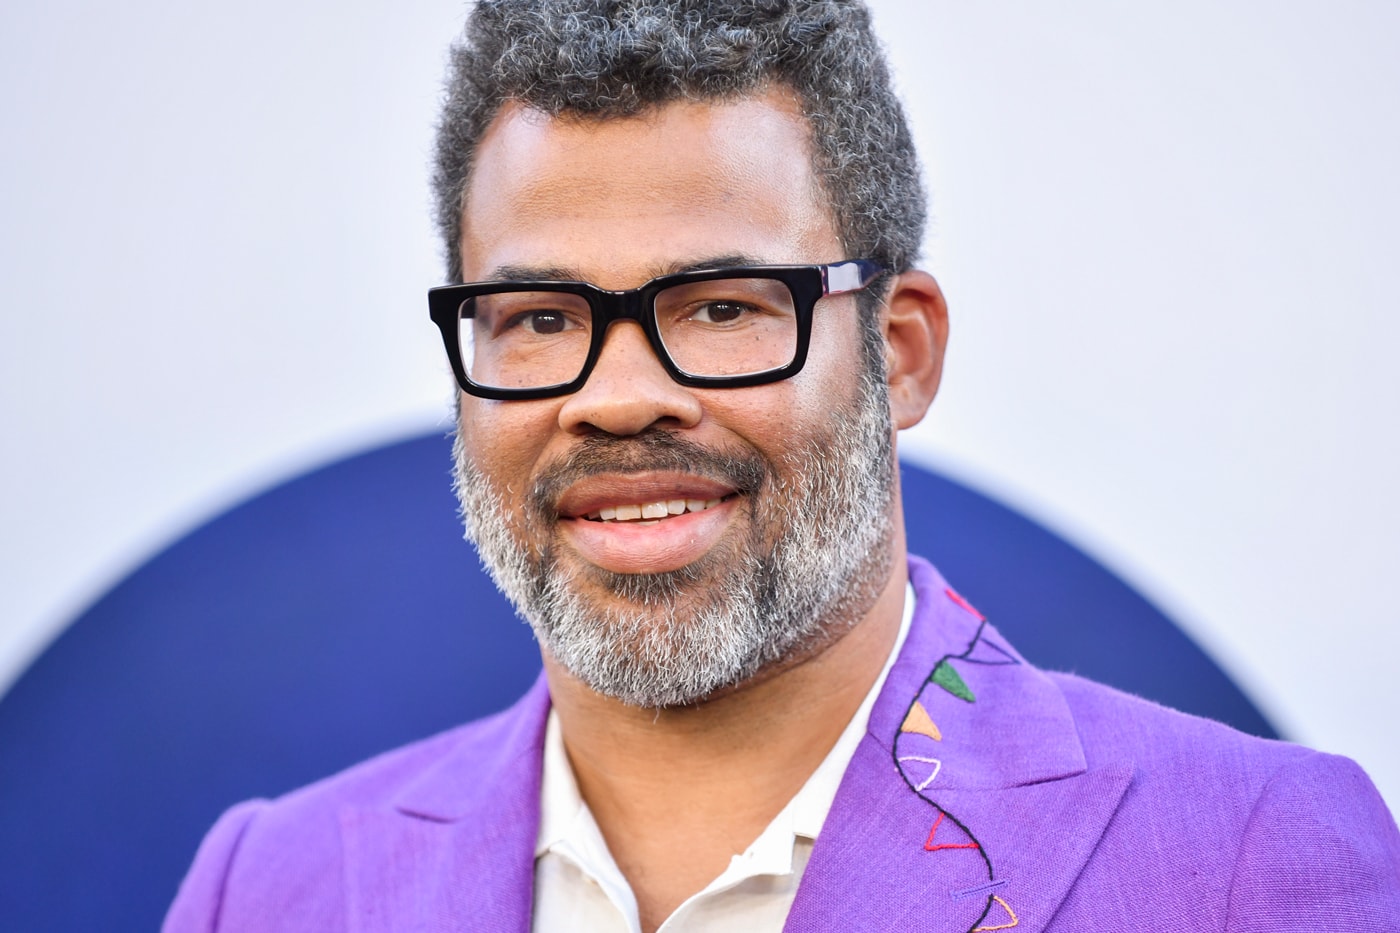 Jordan Peele Out There Screaming An Anthology of New Black Horror release info